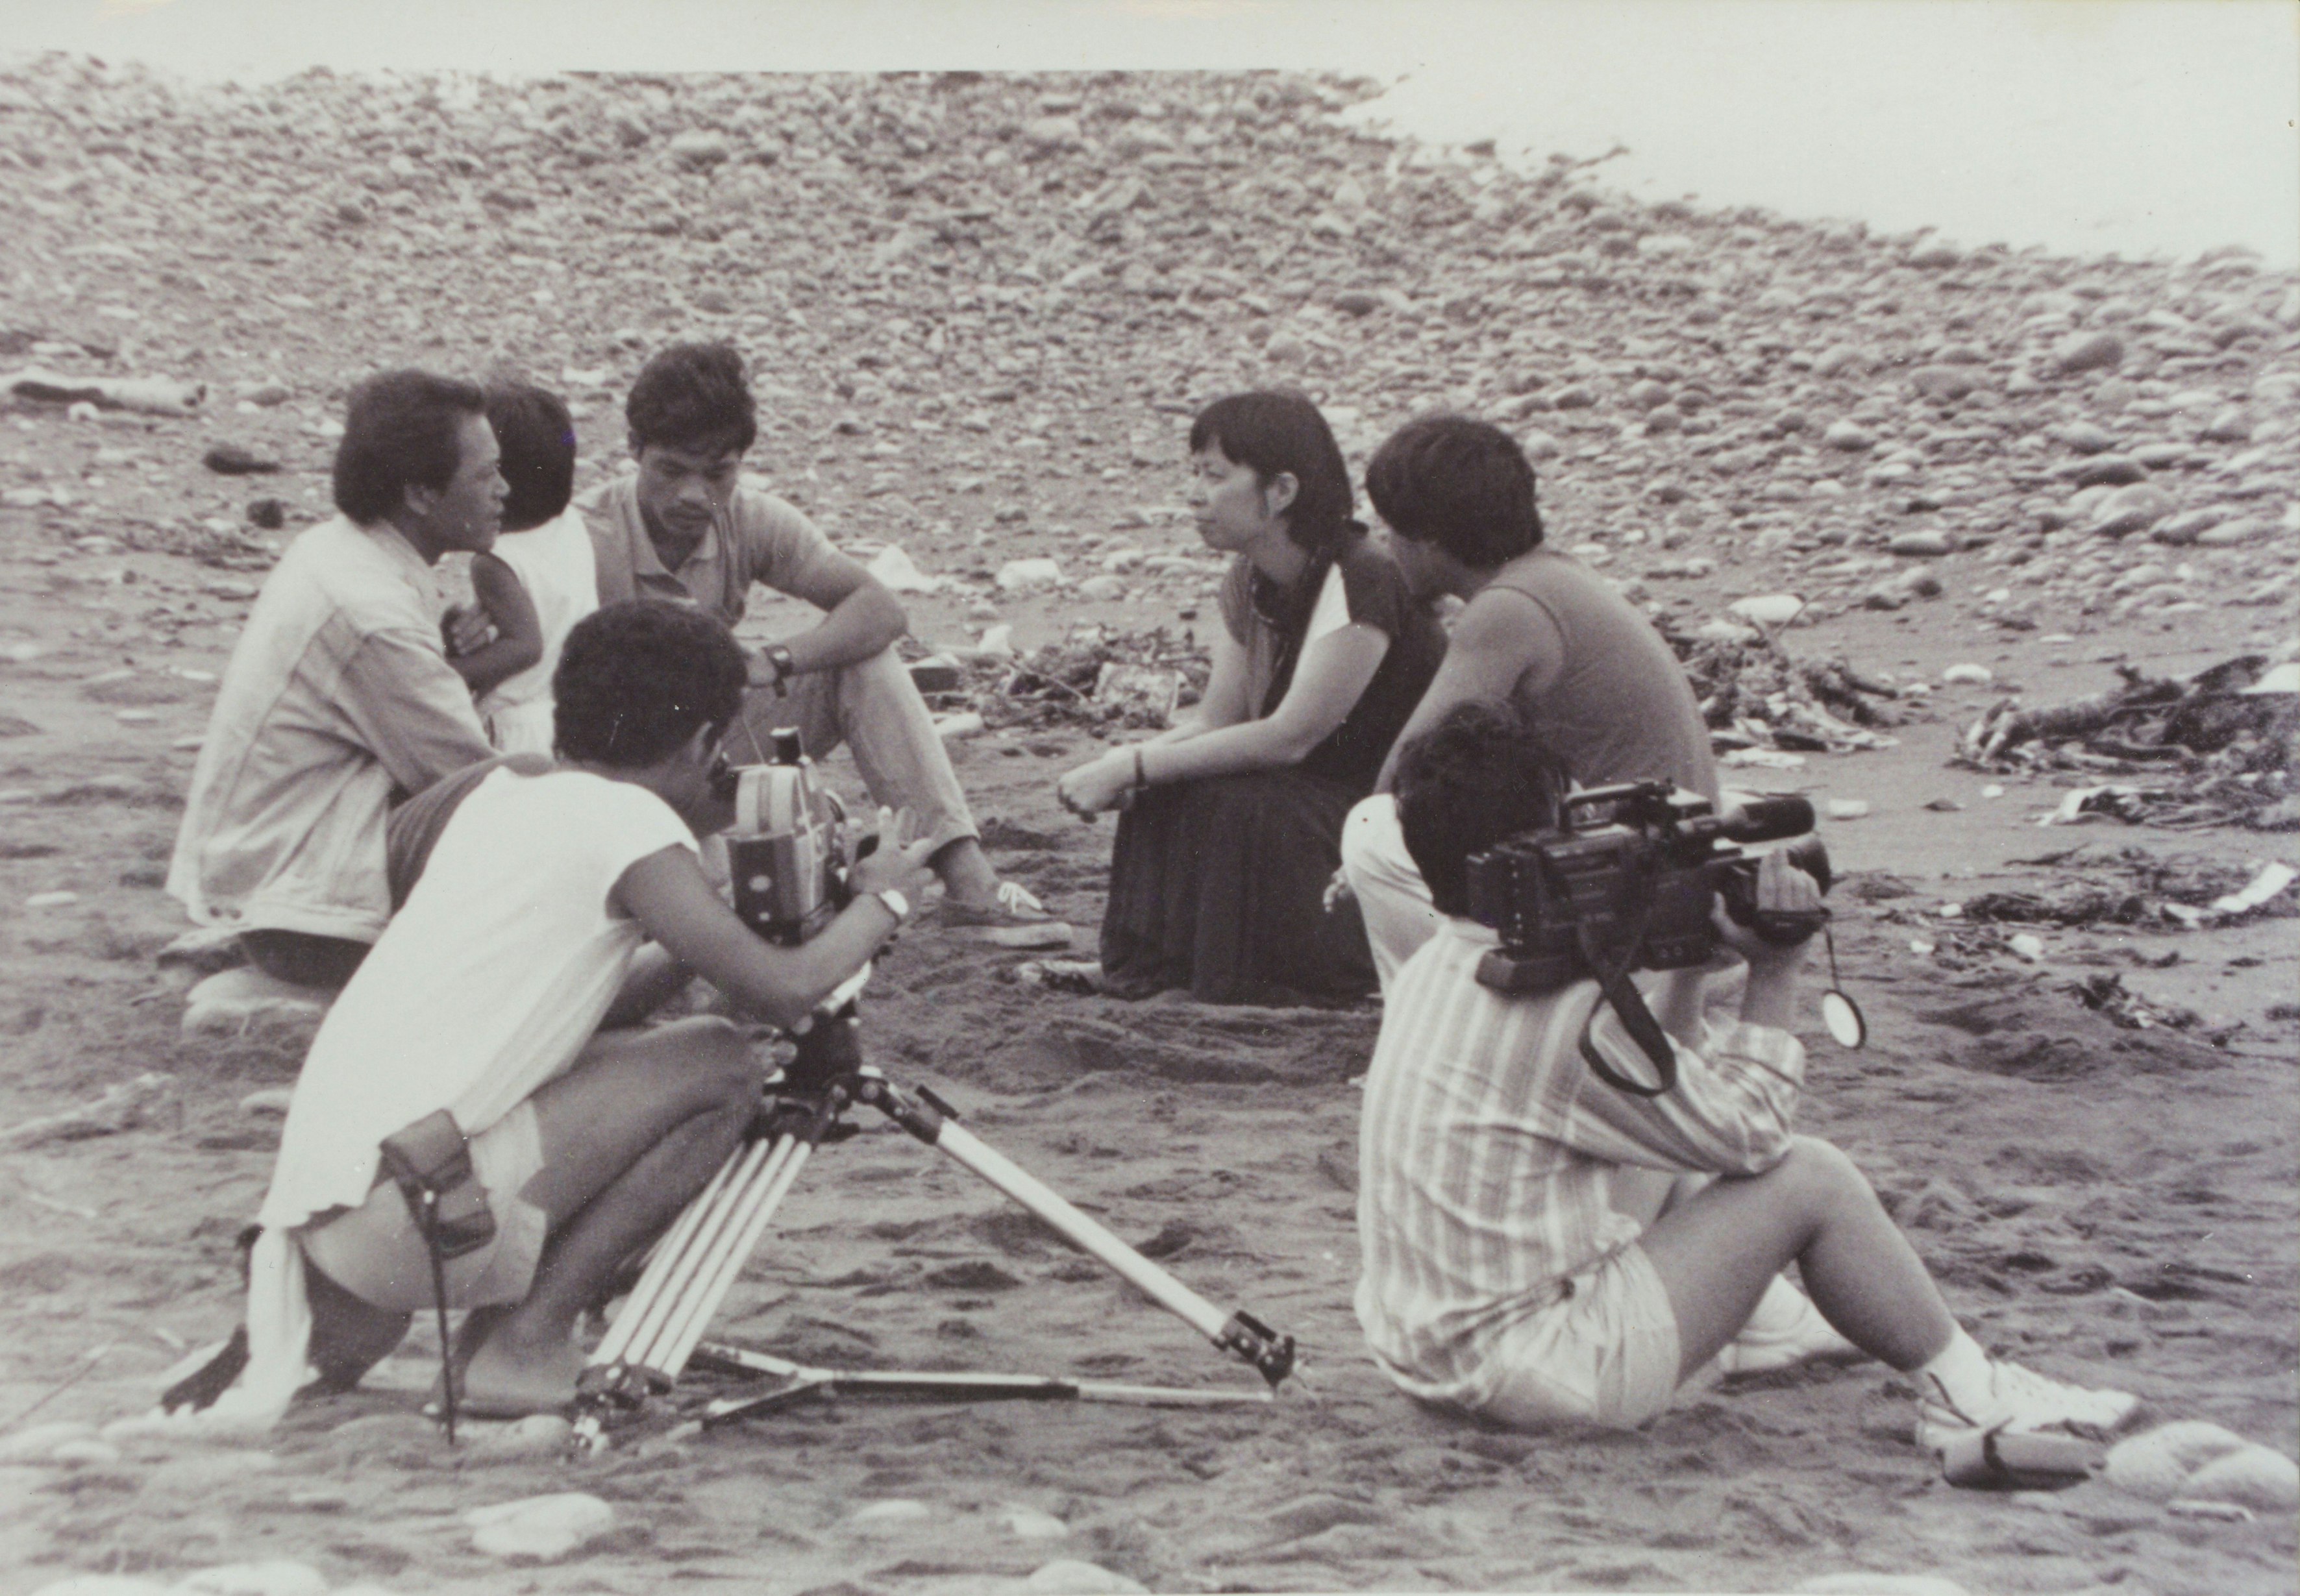 A group of people are sitting and kneeling down in a field. Two people are carrying camera equipment.